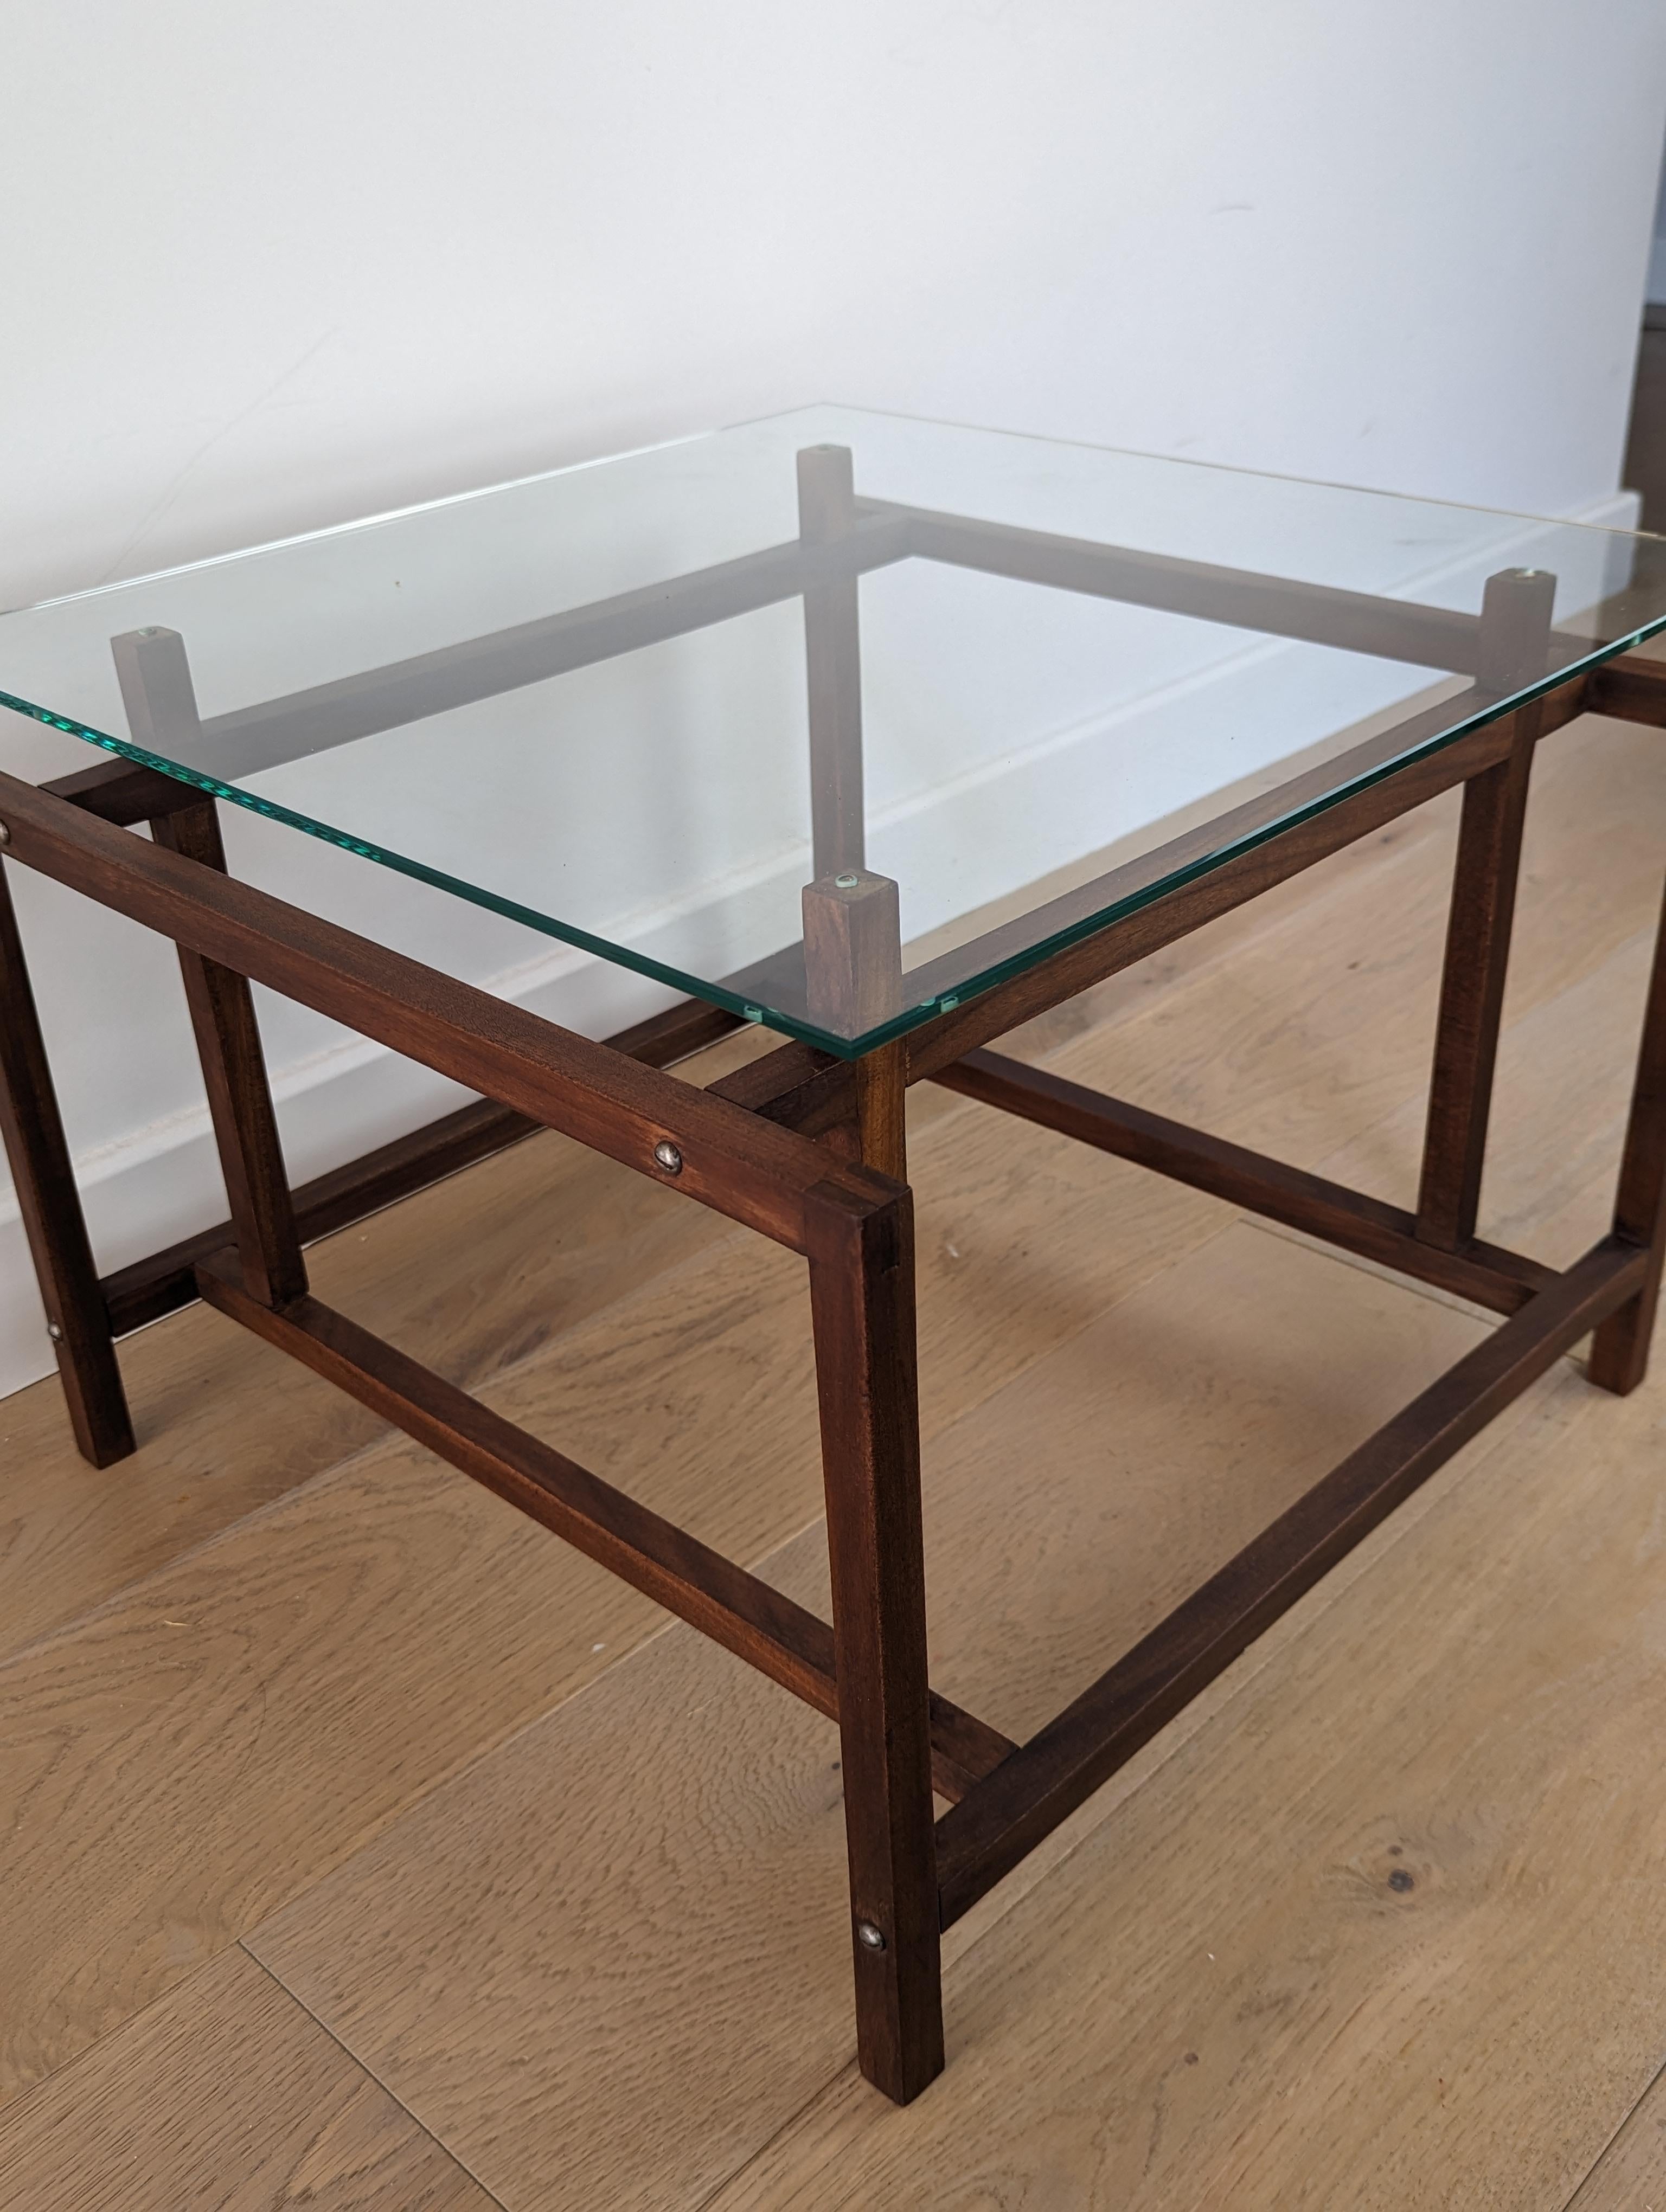 Henning Norgaard for Comfort side table in teak with glass table top For Sale 5